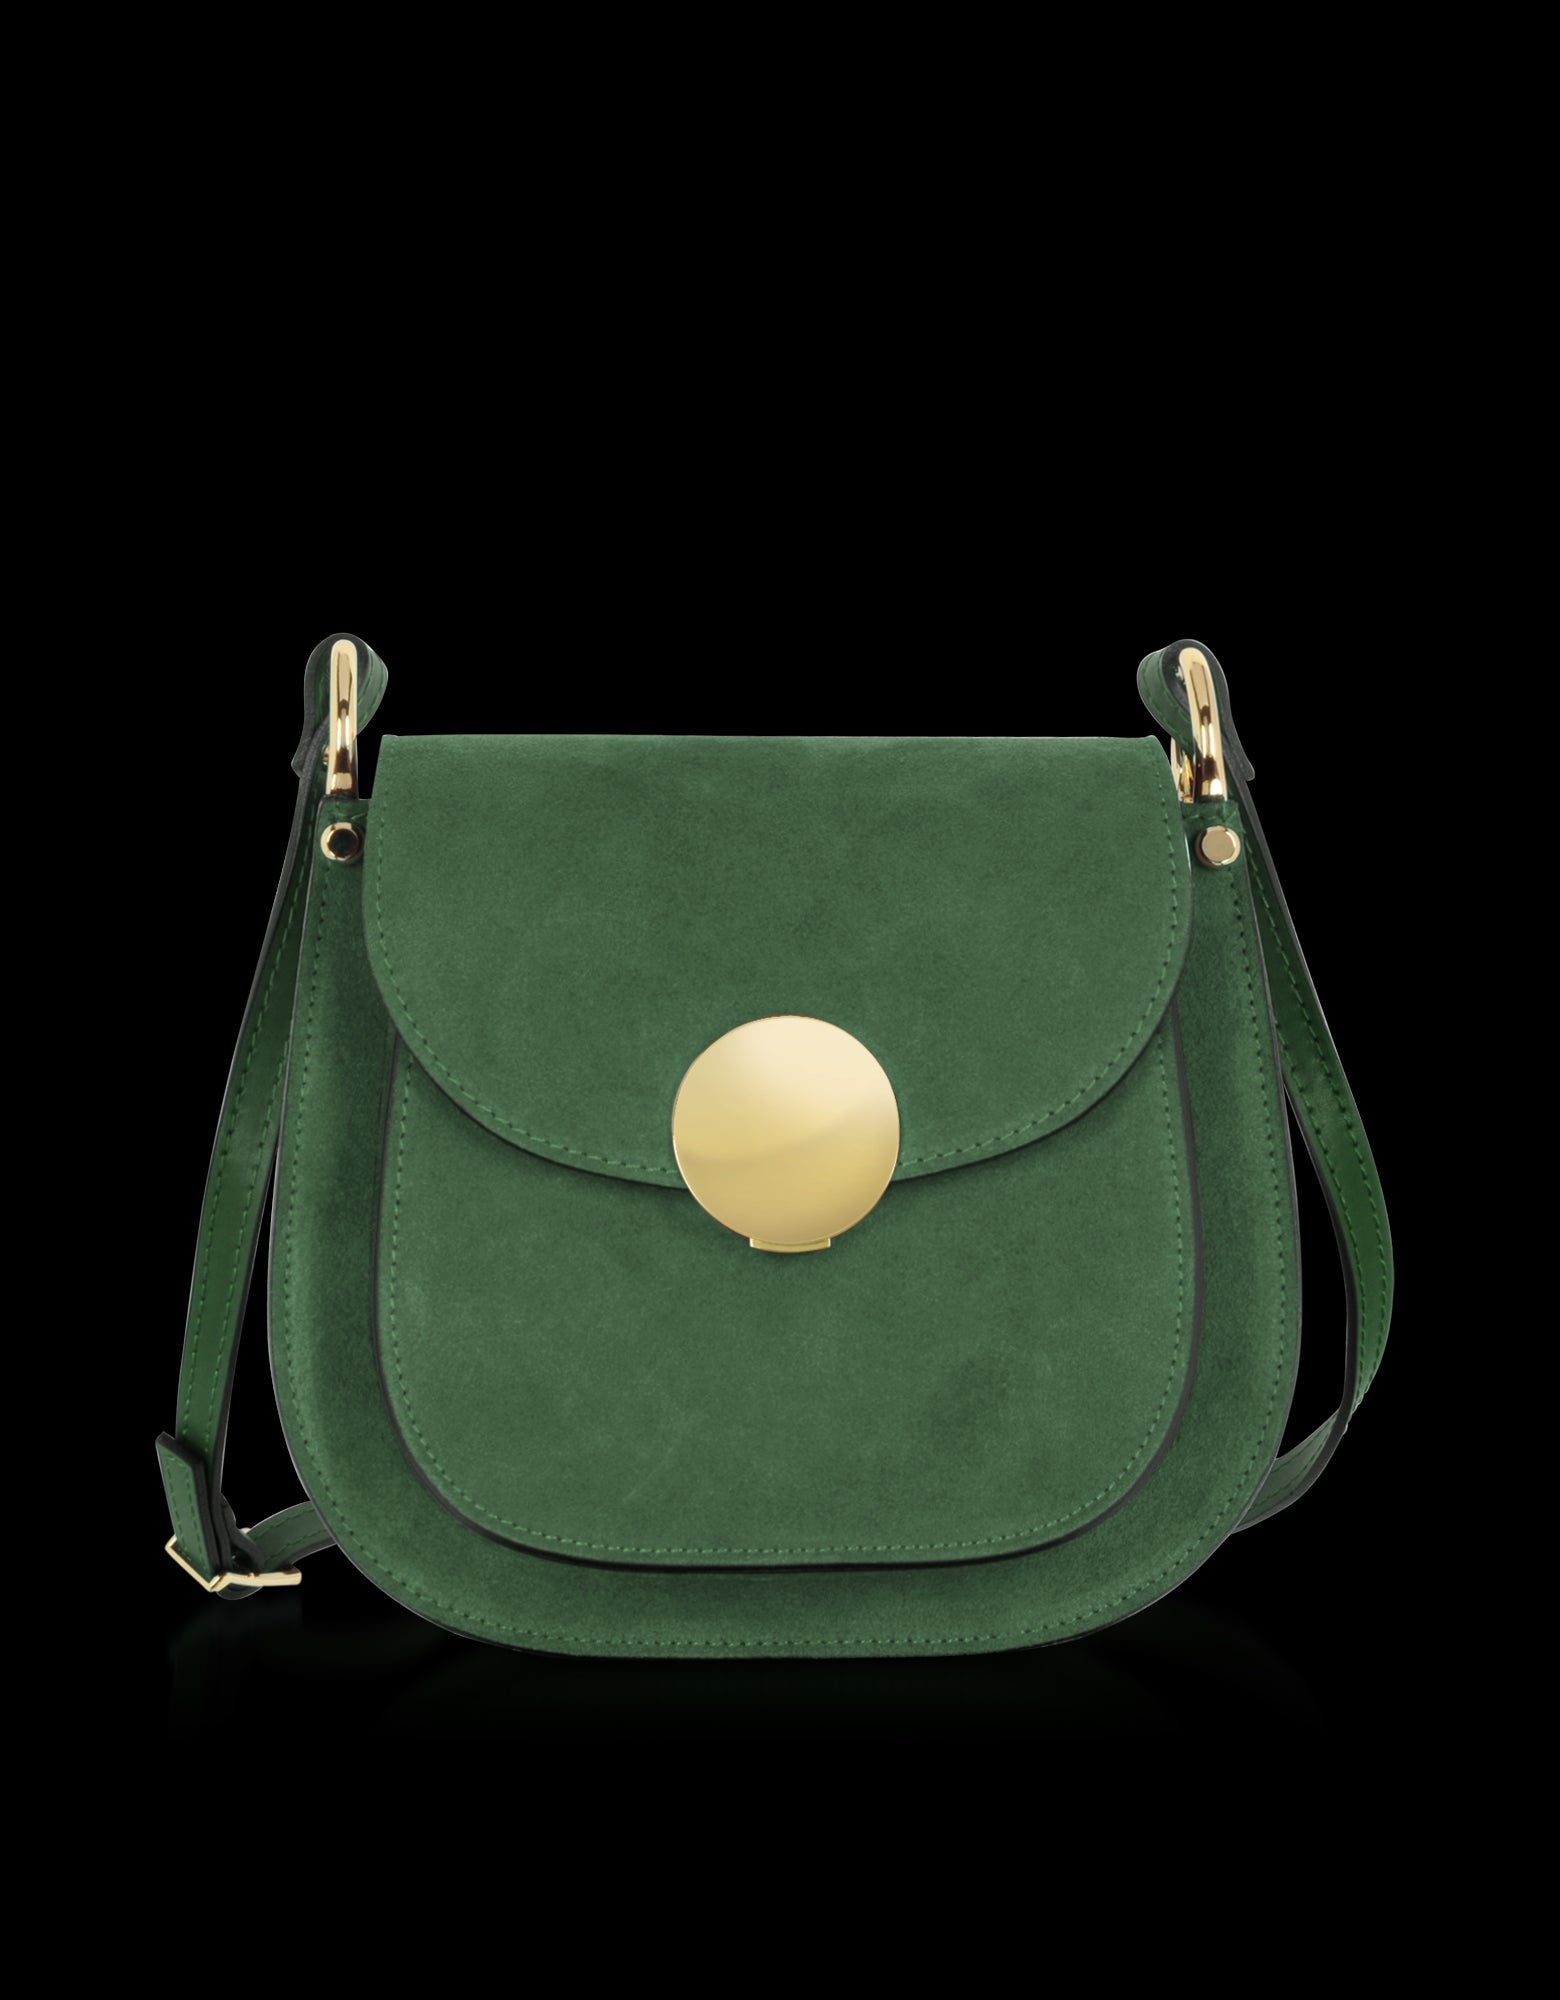 Le Parmentier Agave Luxe Saddle Bag in Italian Calf Leather